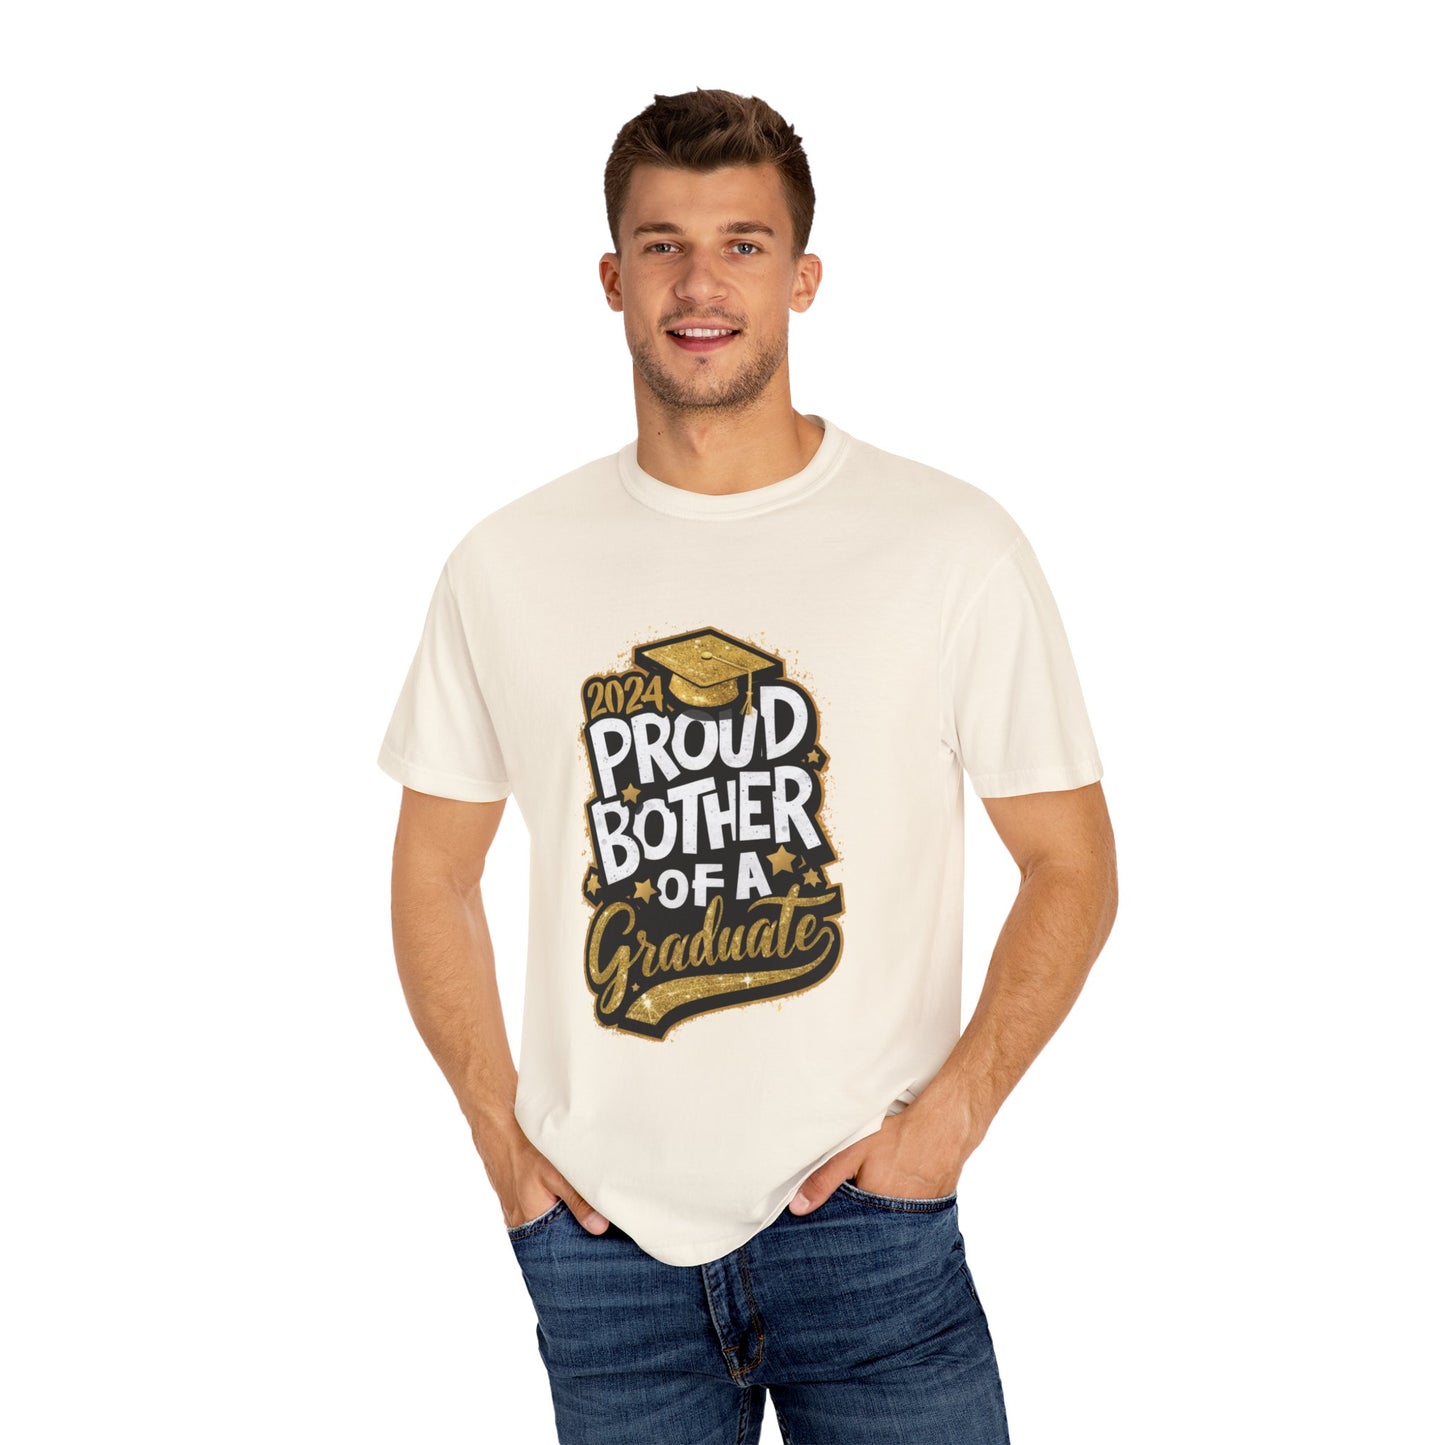 Proud Brother of a 2024 Graduate Unisex Garment-dyed T-shirt Cotton Funny Humorous Graphic Soft Premium Unisex Men Women Ivory T-shirt Birthday Gift-45